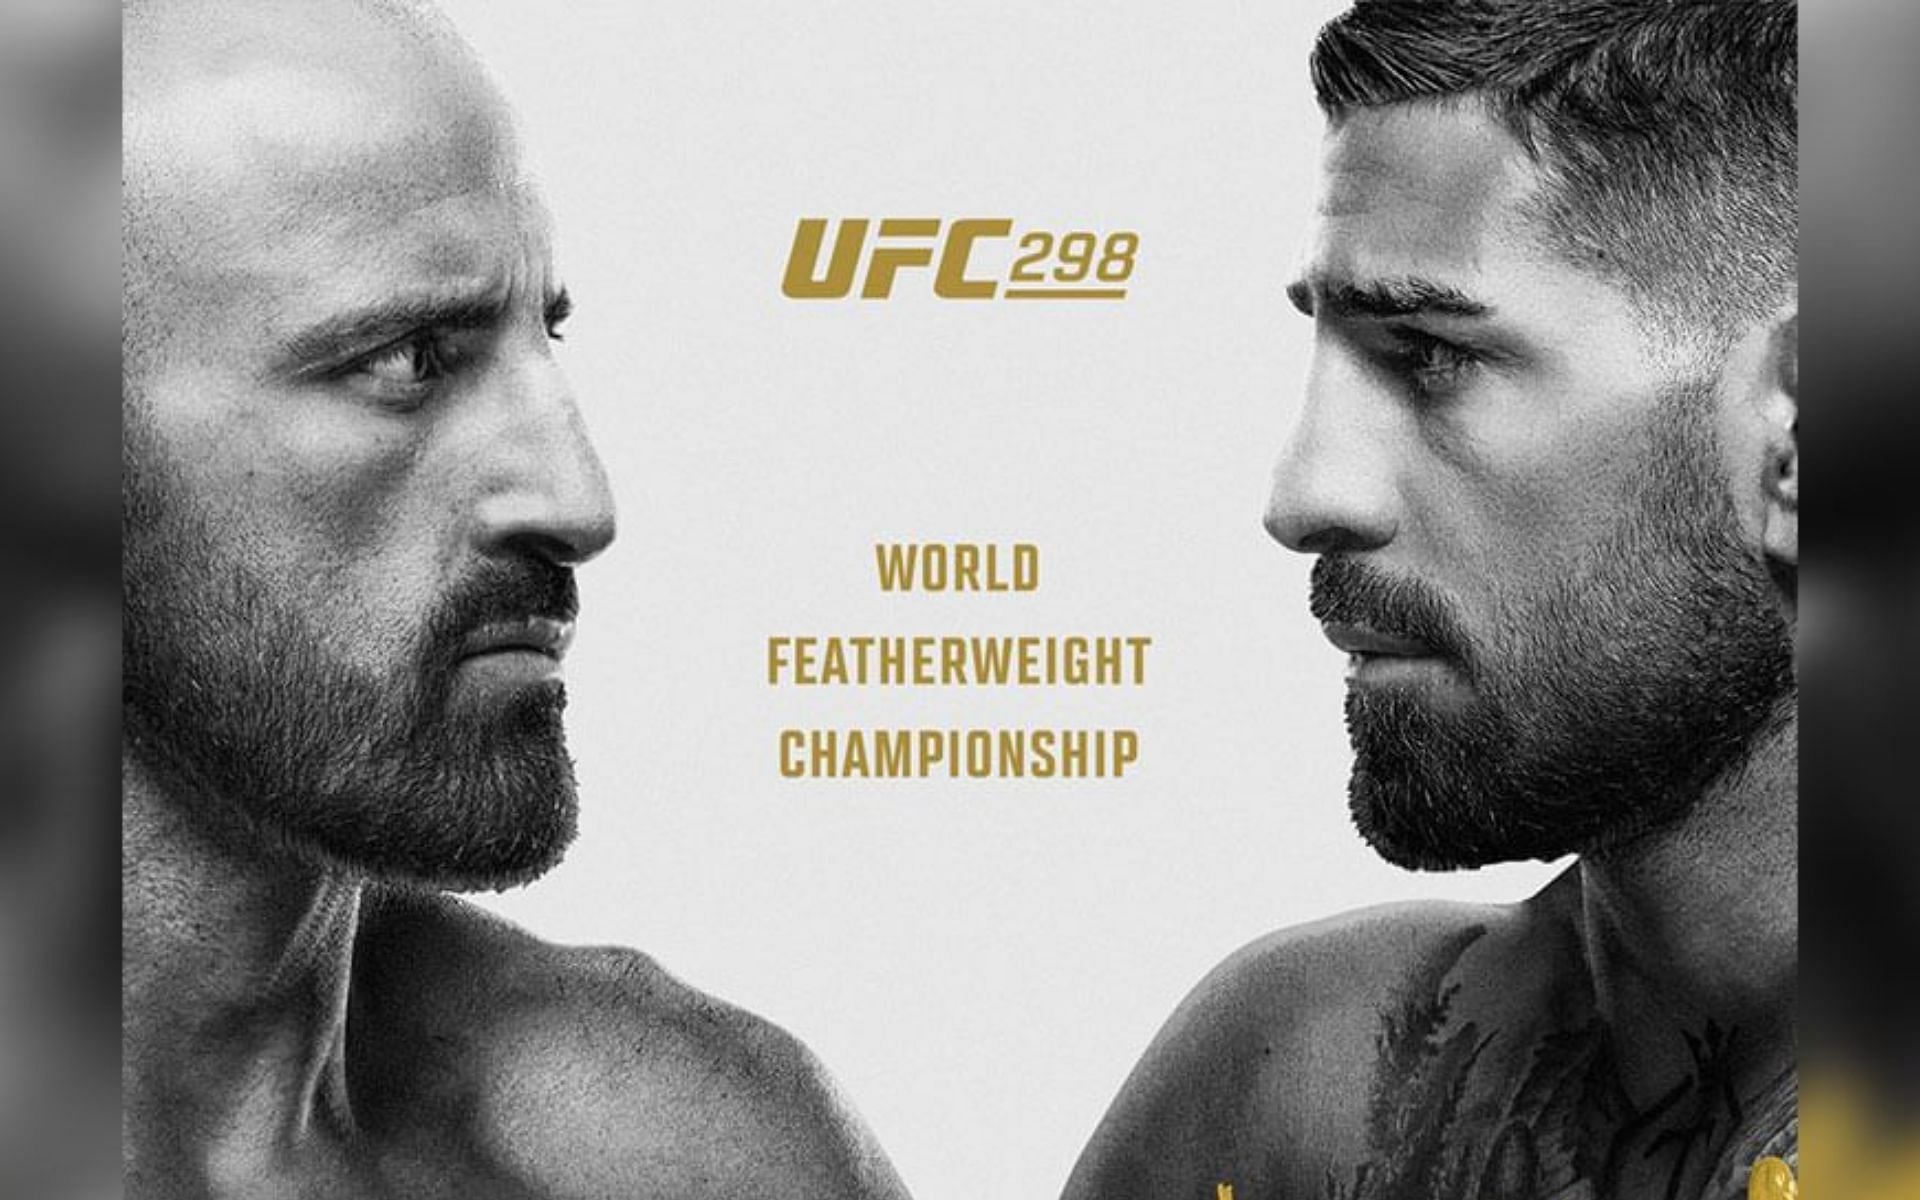 UFC 298 will take place on Feb 17 [Image credits: @ufc on Instagram]